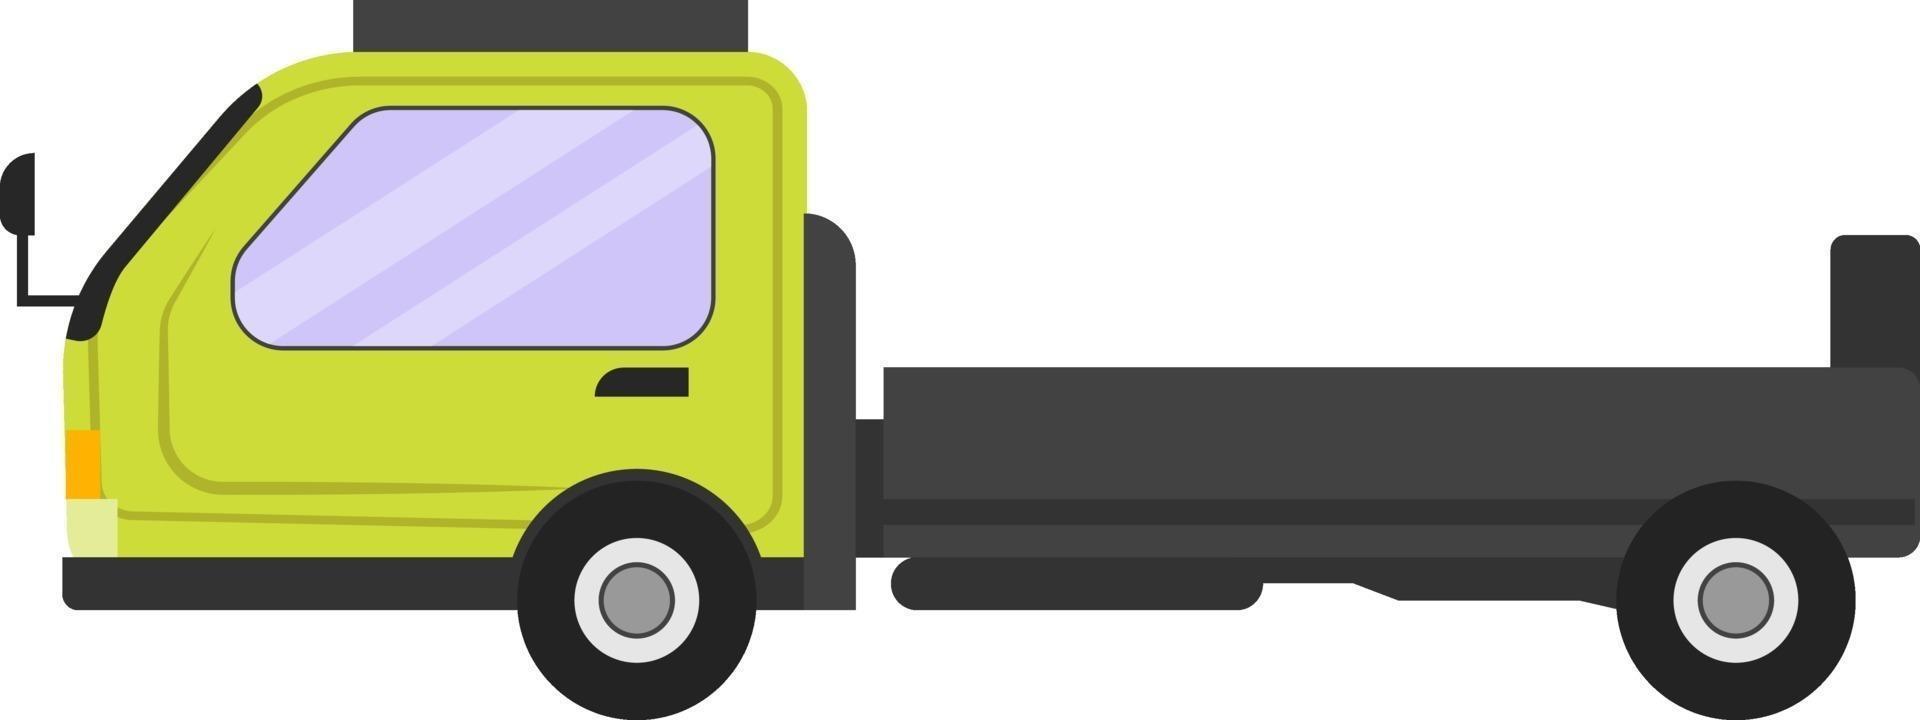 Green truck, illustration, vector on a white background.